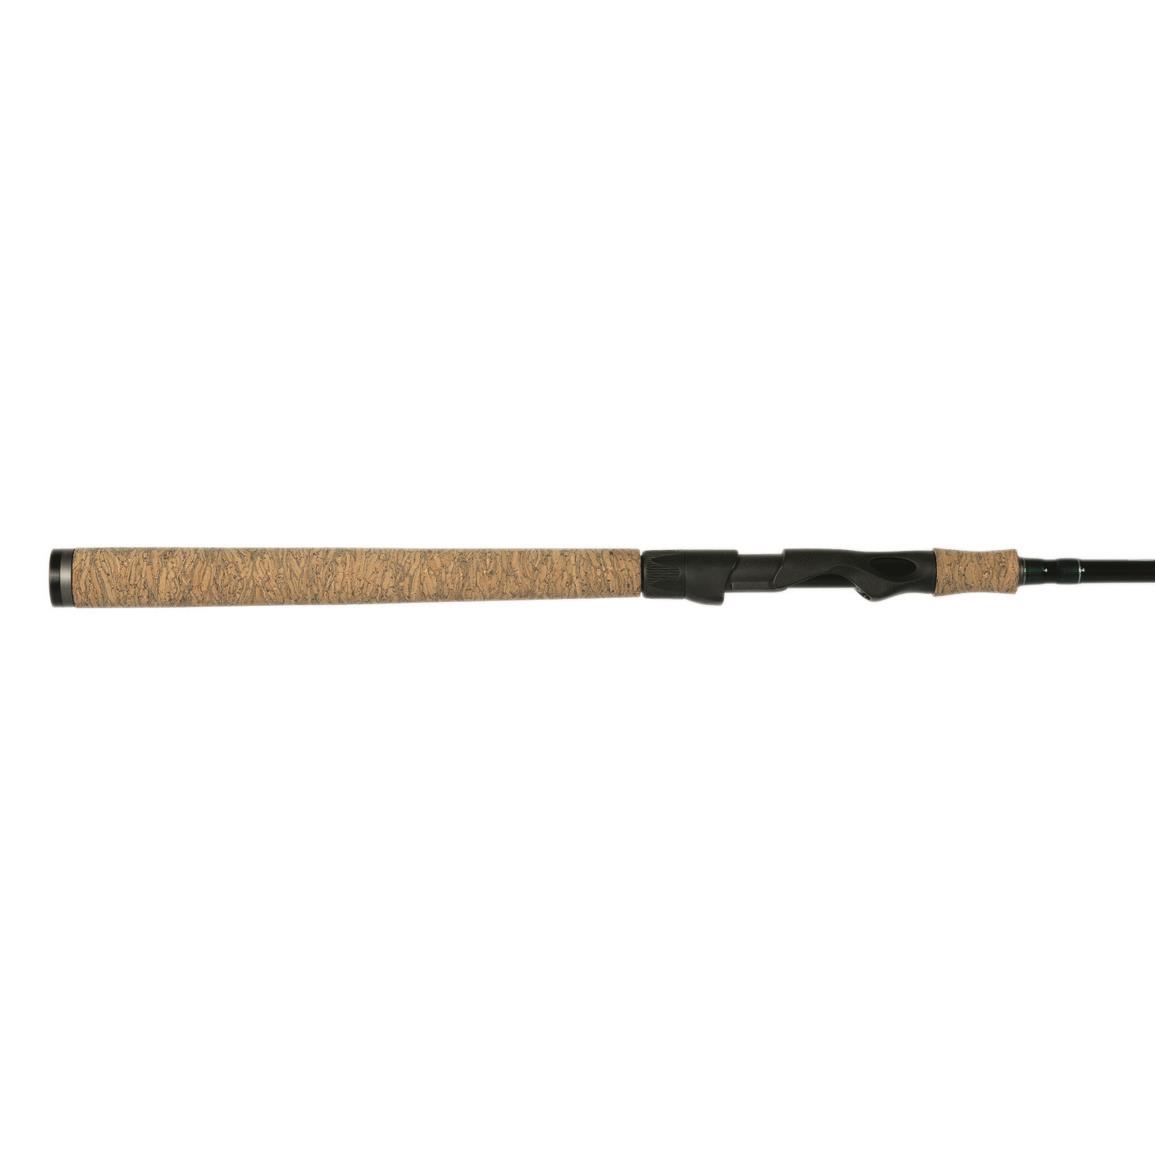 Ugly Stik 6'6” GX2 Casting Rod, One Piece Casting Rod, 8-20lb Line Rating,  Medium Rod Power, Moderate Fast Action, 1/4-5/8 oz. Lure Rating